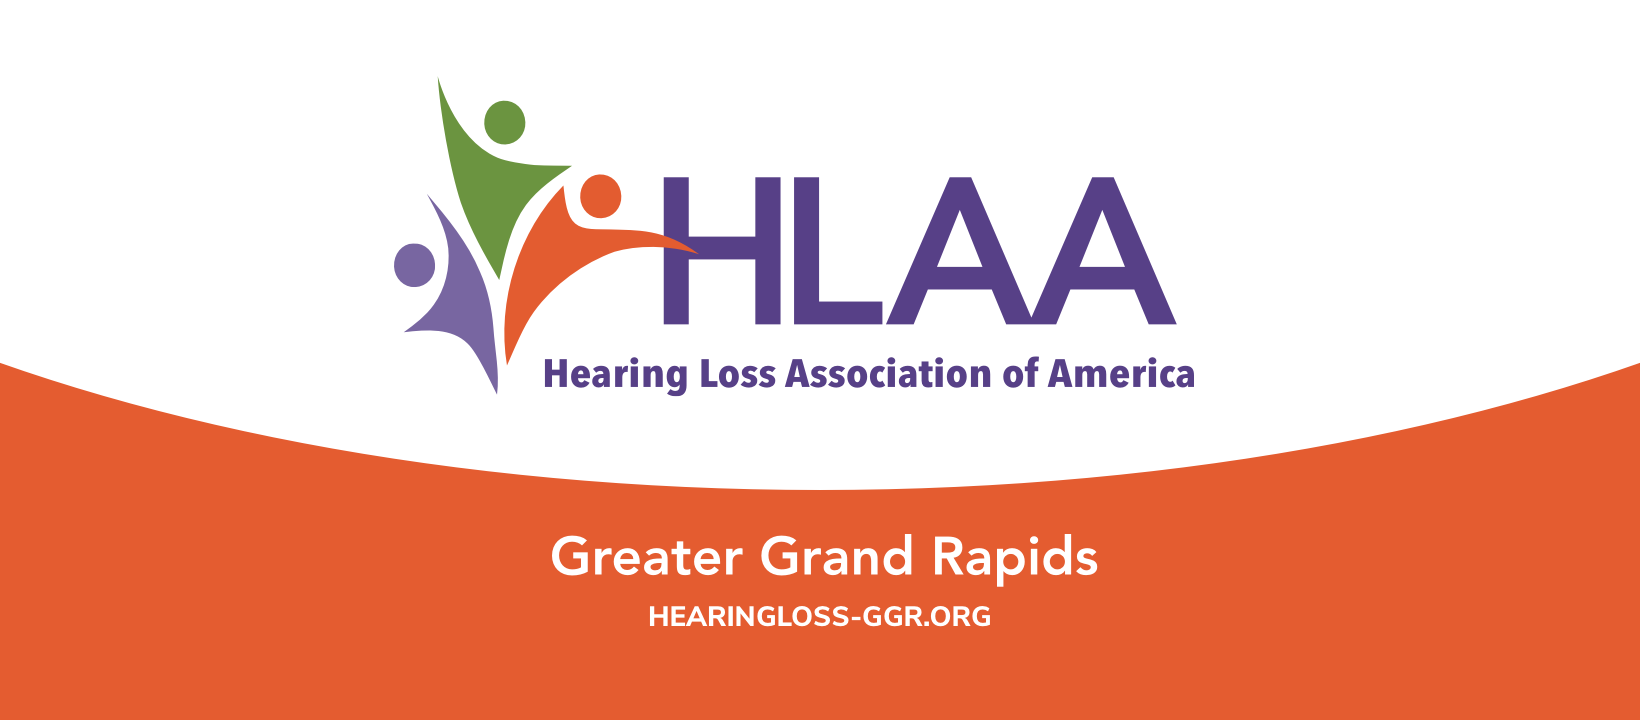 Business card shaped logo.   Top one third of background is white, sporting the HLAA logo.   The bottom one third is curved downward as an orange background with white letters saying Greater Grand Rapids and a white web URL saying hearingloss-ggr.org